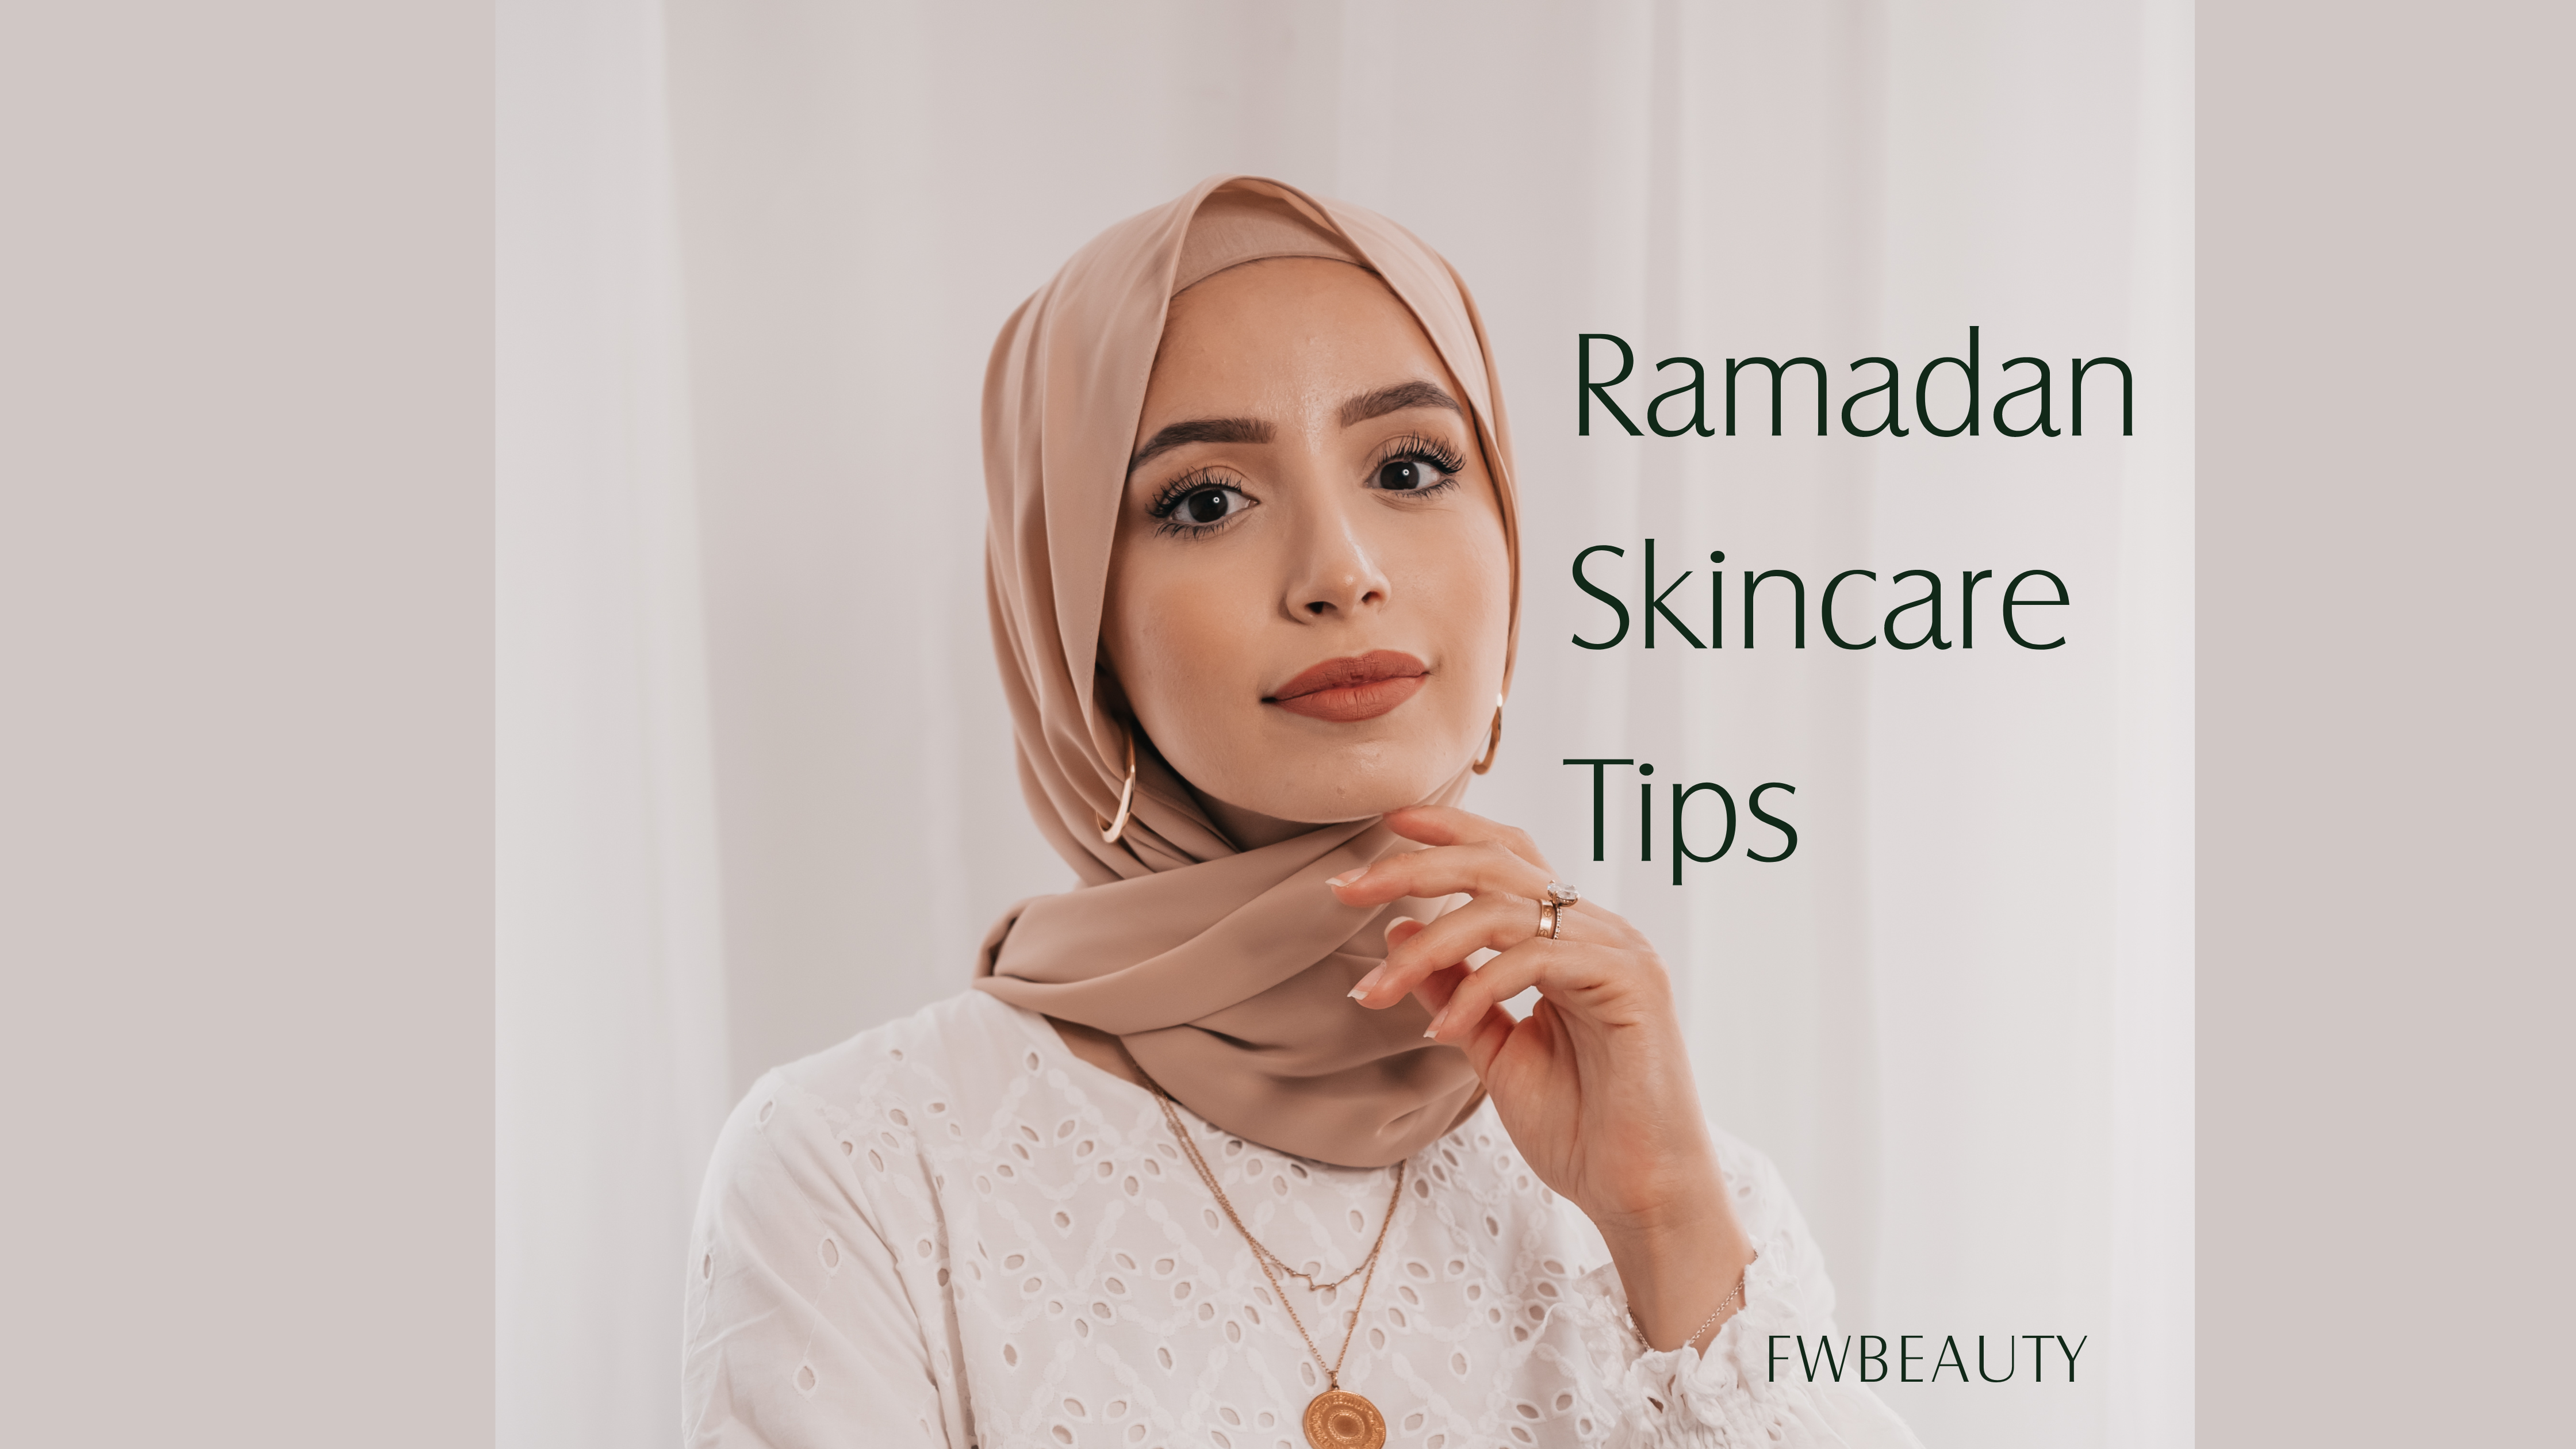 Ramadan Skincare Tips: How to Keep Your Skin Hydrated and Moisturized While Fasting